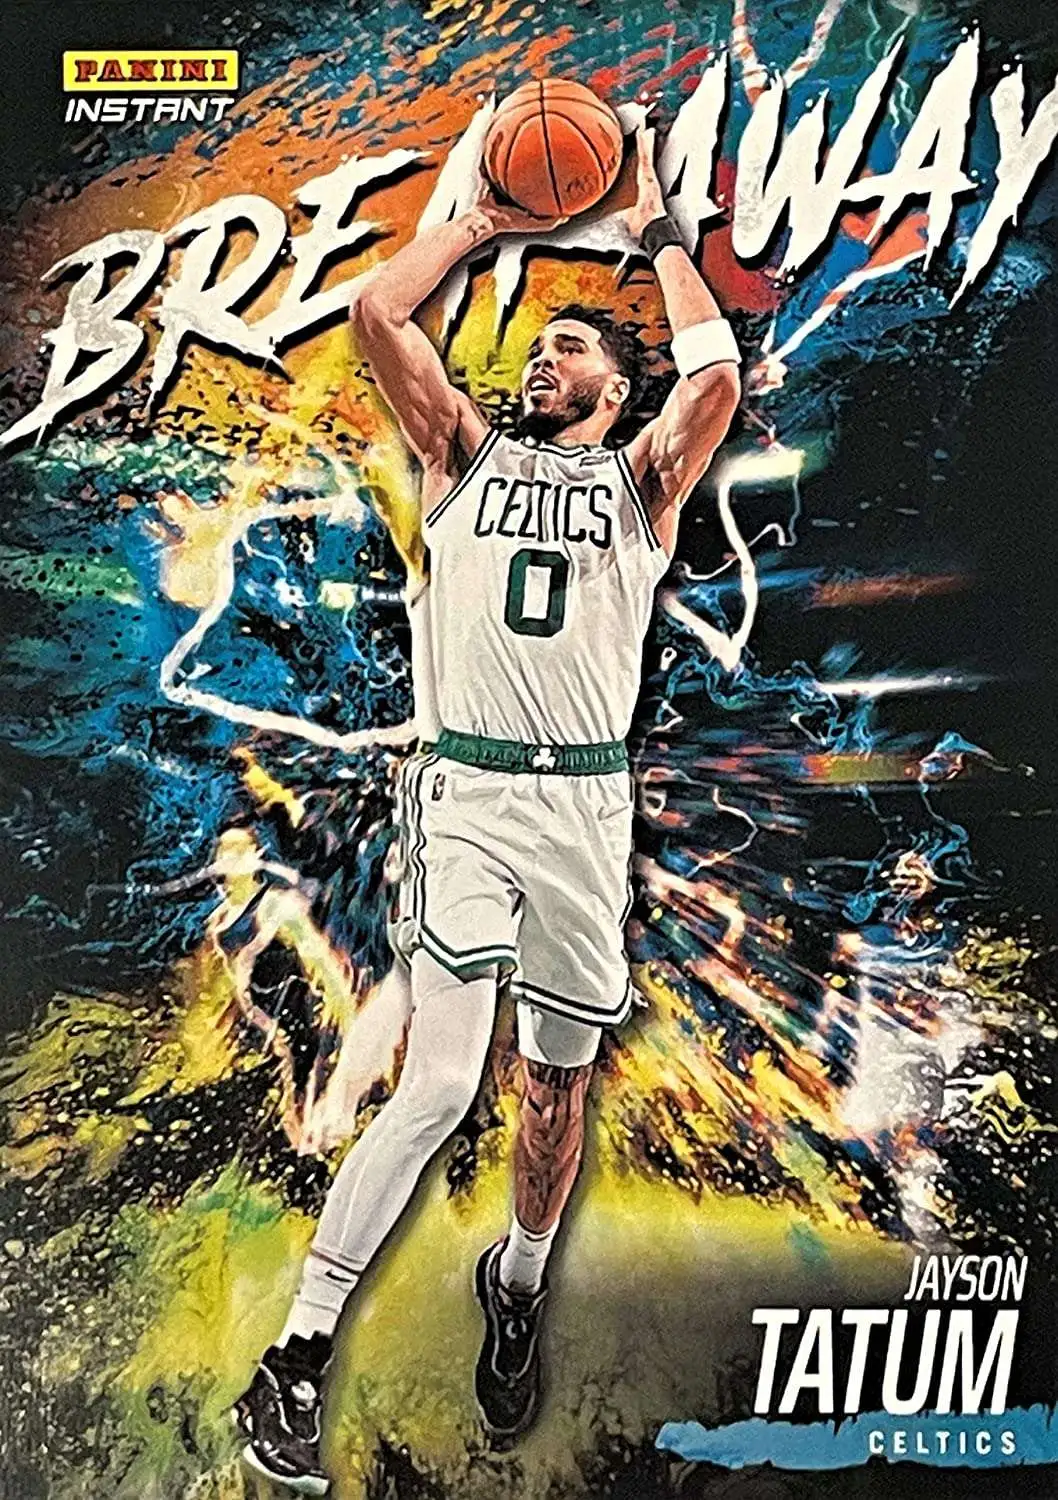 Jayson Tatum Boston Celtics Fanatics Exclusive Parallel Panini Instant Tatum  Sets A Record For Most Assists In A Finals Debut Single Trading Card -  Limited Edition of 99